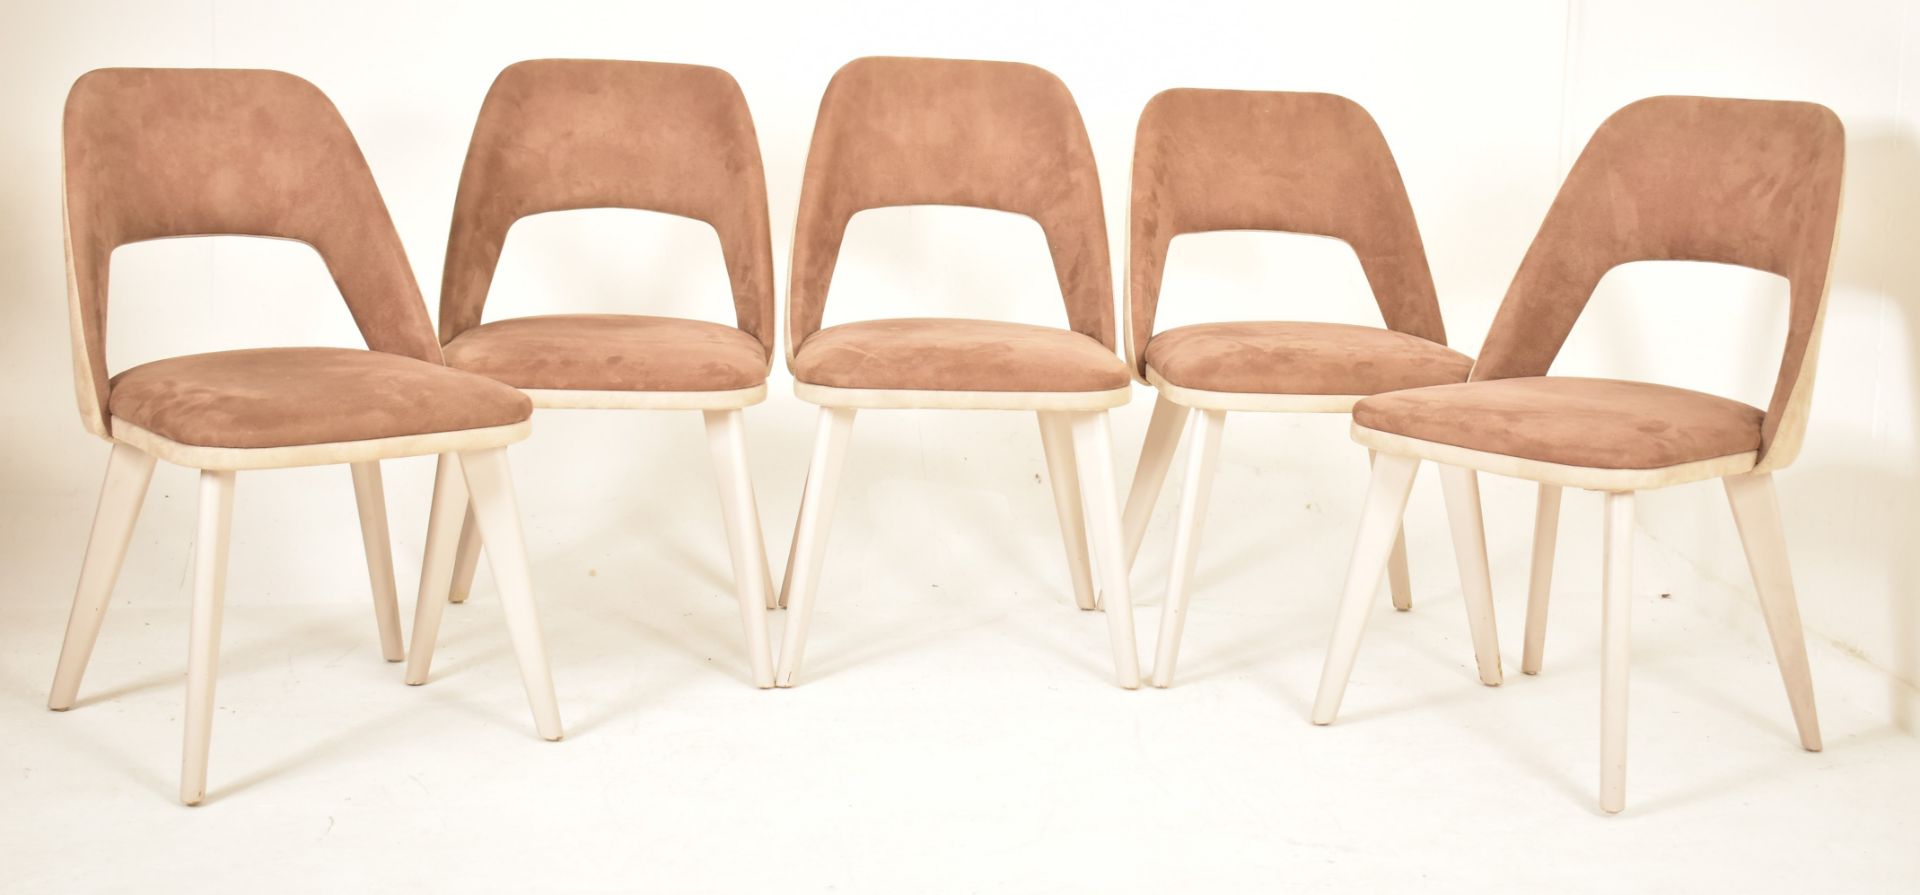 TEN CONTEMPORARY HIGH END DESIGN SUEDE DINING CHAIRS - Image 2 of 6